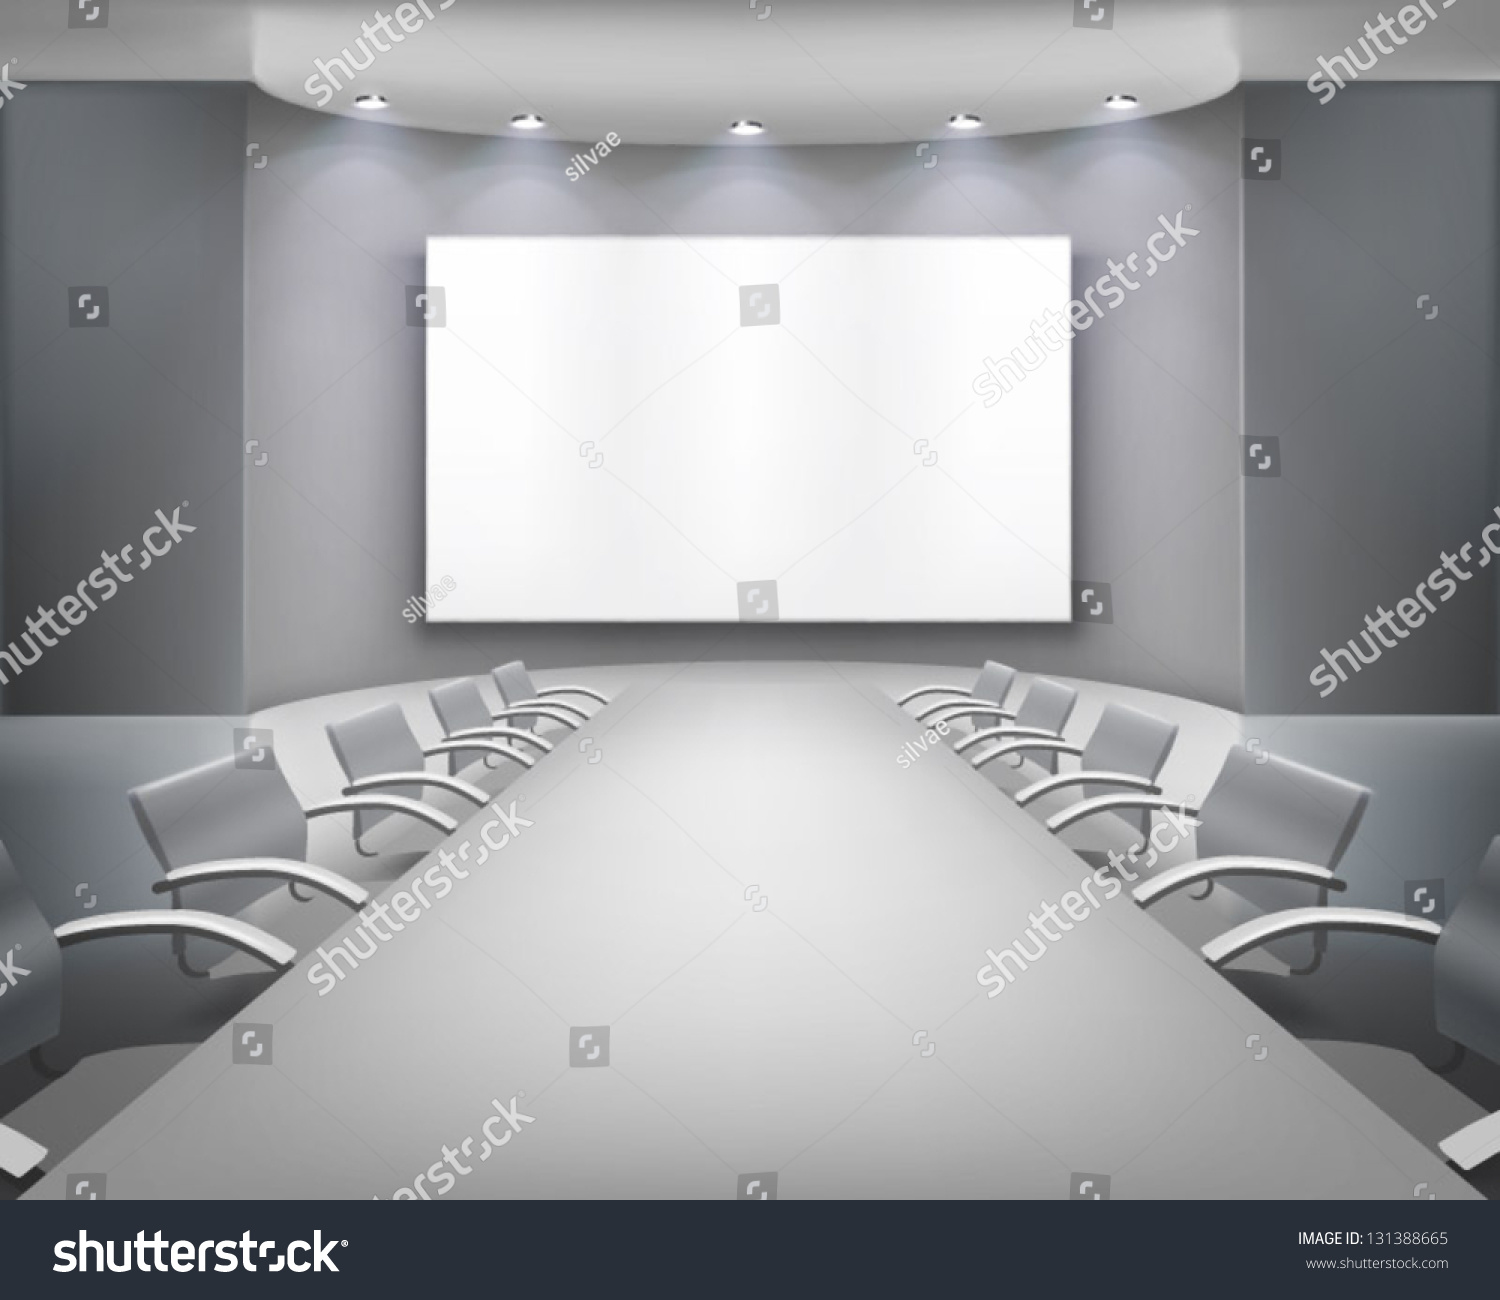 clipart meeting room - photo #35